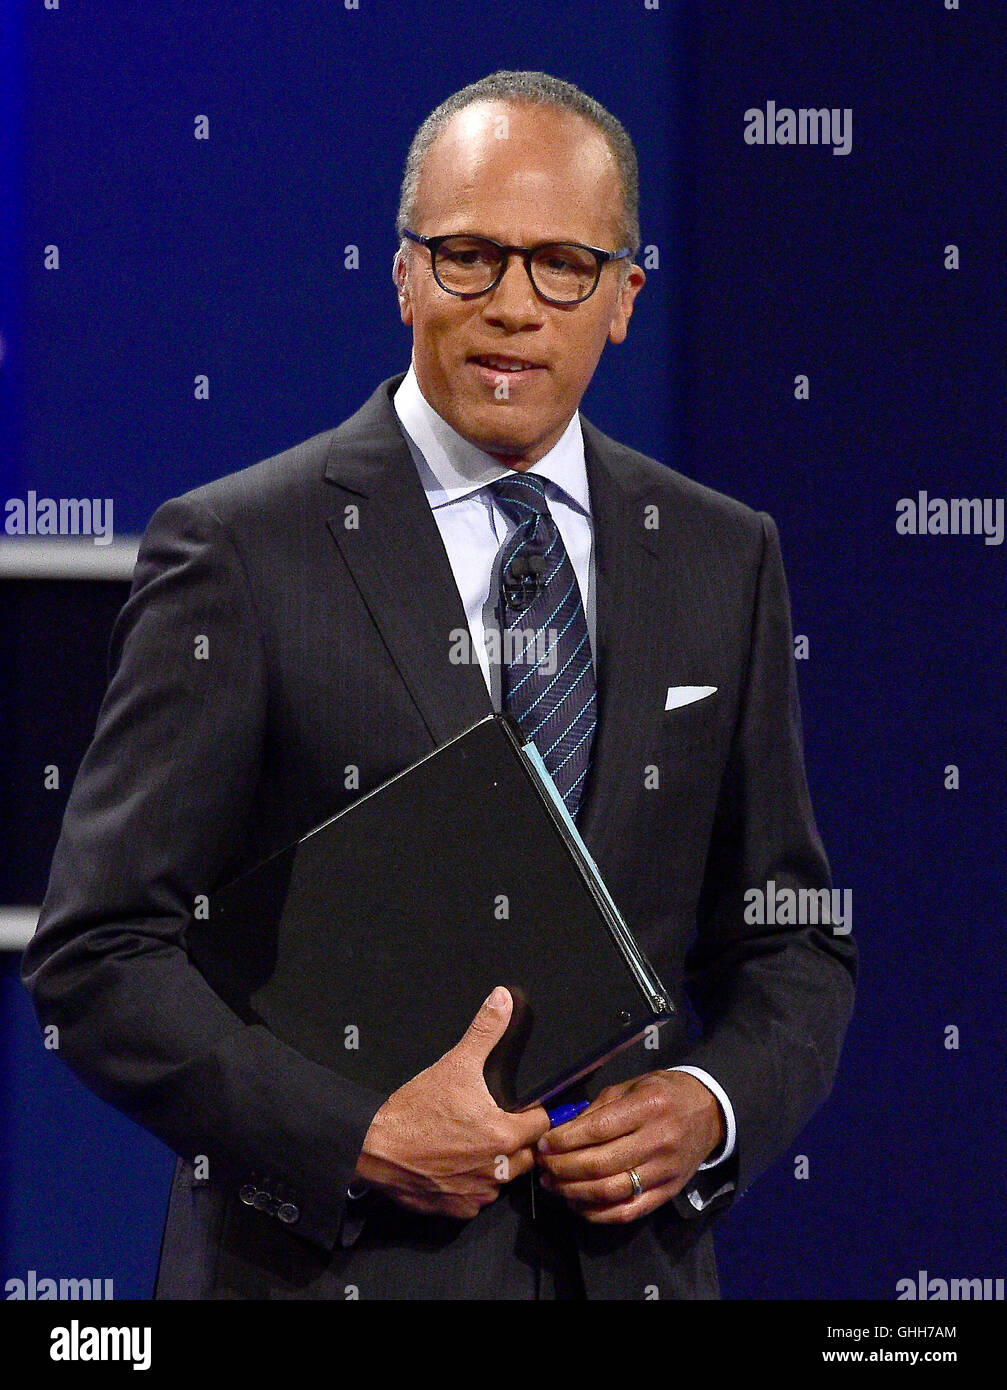 Hempstead, Us. 26th Sep, 2016. NBC Nightly News anchor Lester Holt addresses the audience prior to former United States Secretary of State Hillary Clinton, the Democratic Party nominee for President of the US and businessman Donald J. Trump, the Republican Party nominee for President of the US, appearing in the first of three presidential general election debates at Hofstra University in Hempstead, New York on Monday, September 26, 2016. Credit: Ron Sachs/CNP - NO WIRE SERVICE - © dpa/Alamy Live News Stock Photo